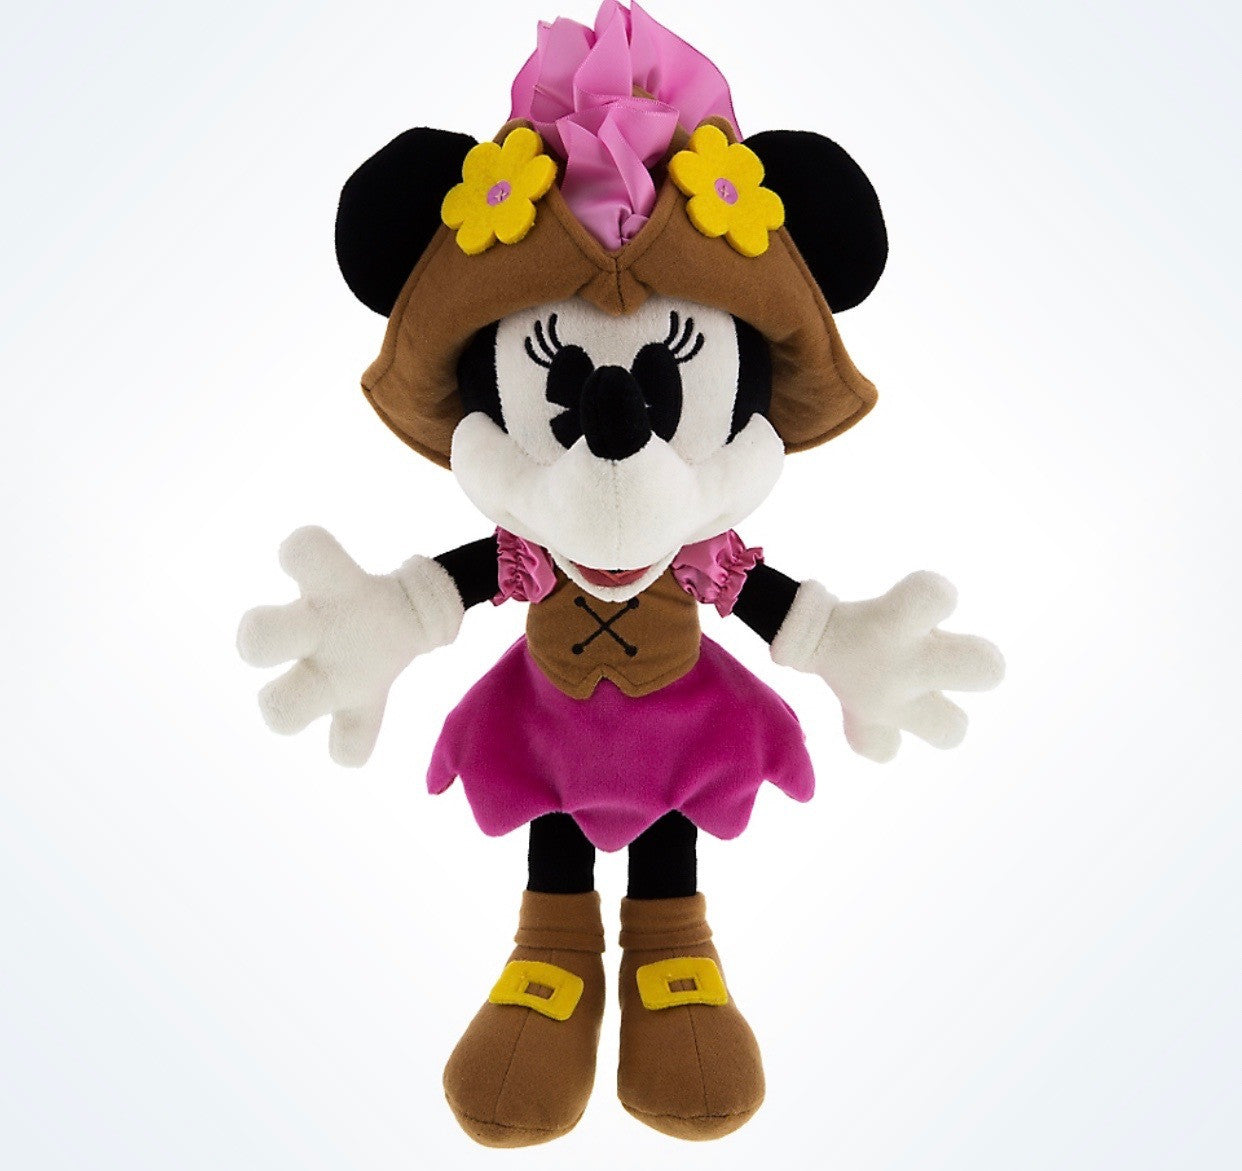 Disney Parks Minnie Mouse as Pirate 9" Plush Doll New with Tags